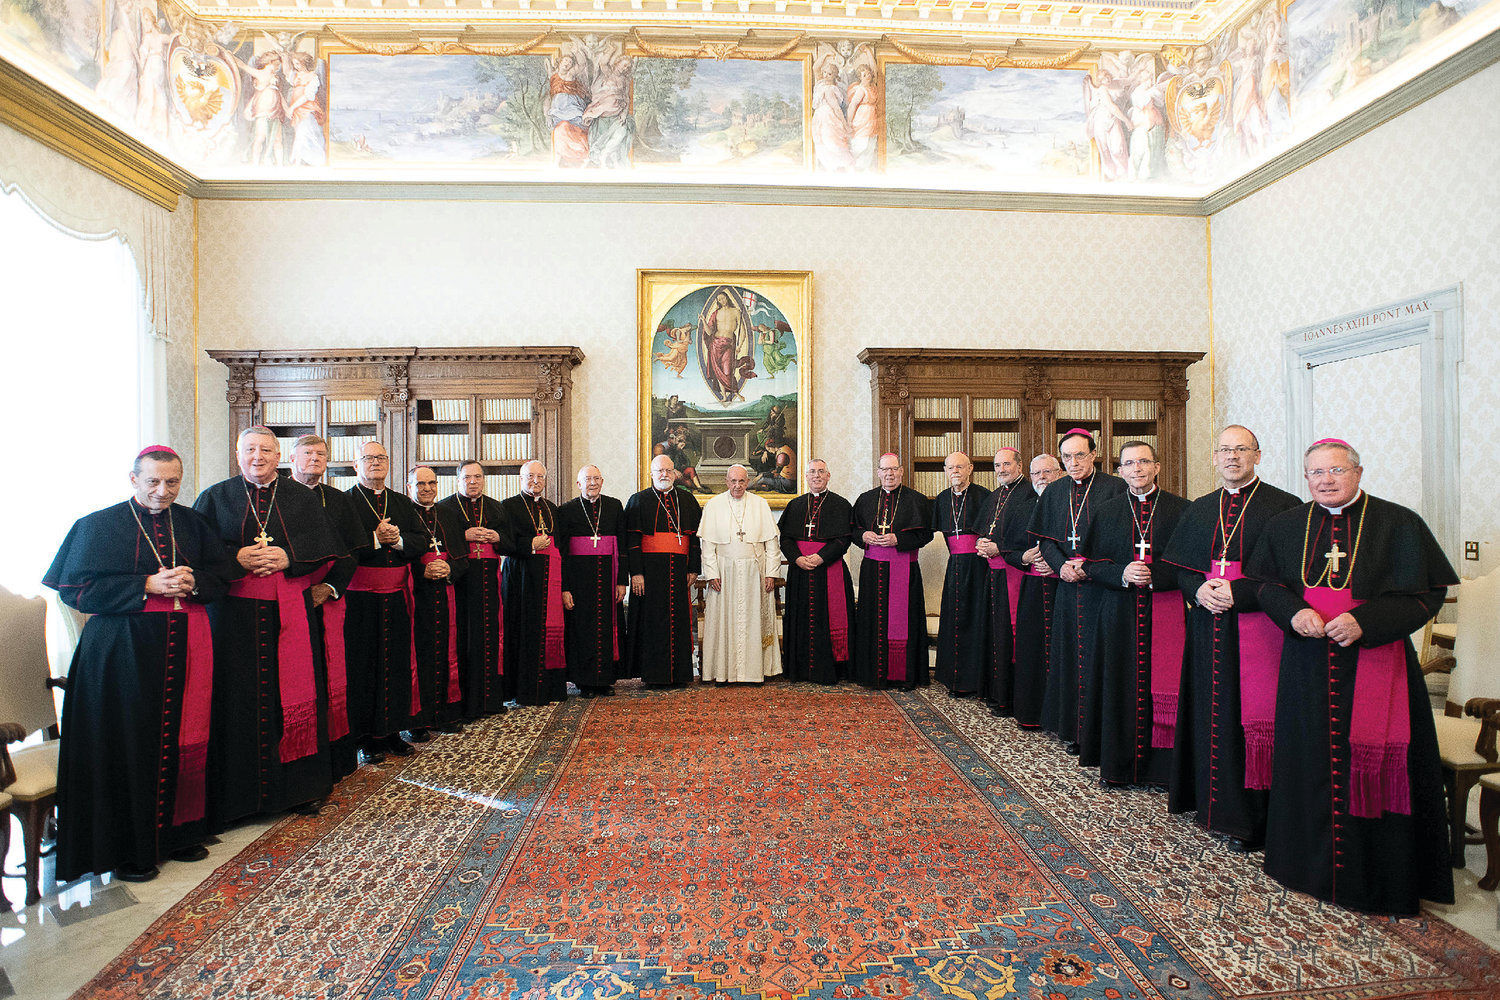 Pope Francis poses with U.S. bishops from New England during their "ad limina" visits at the Vatican Nov. 7, 2019.